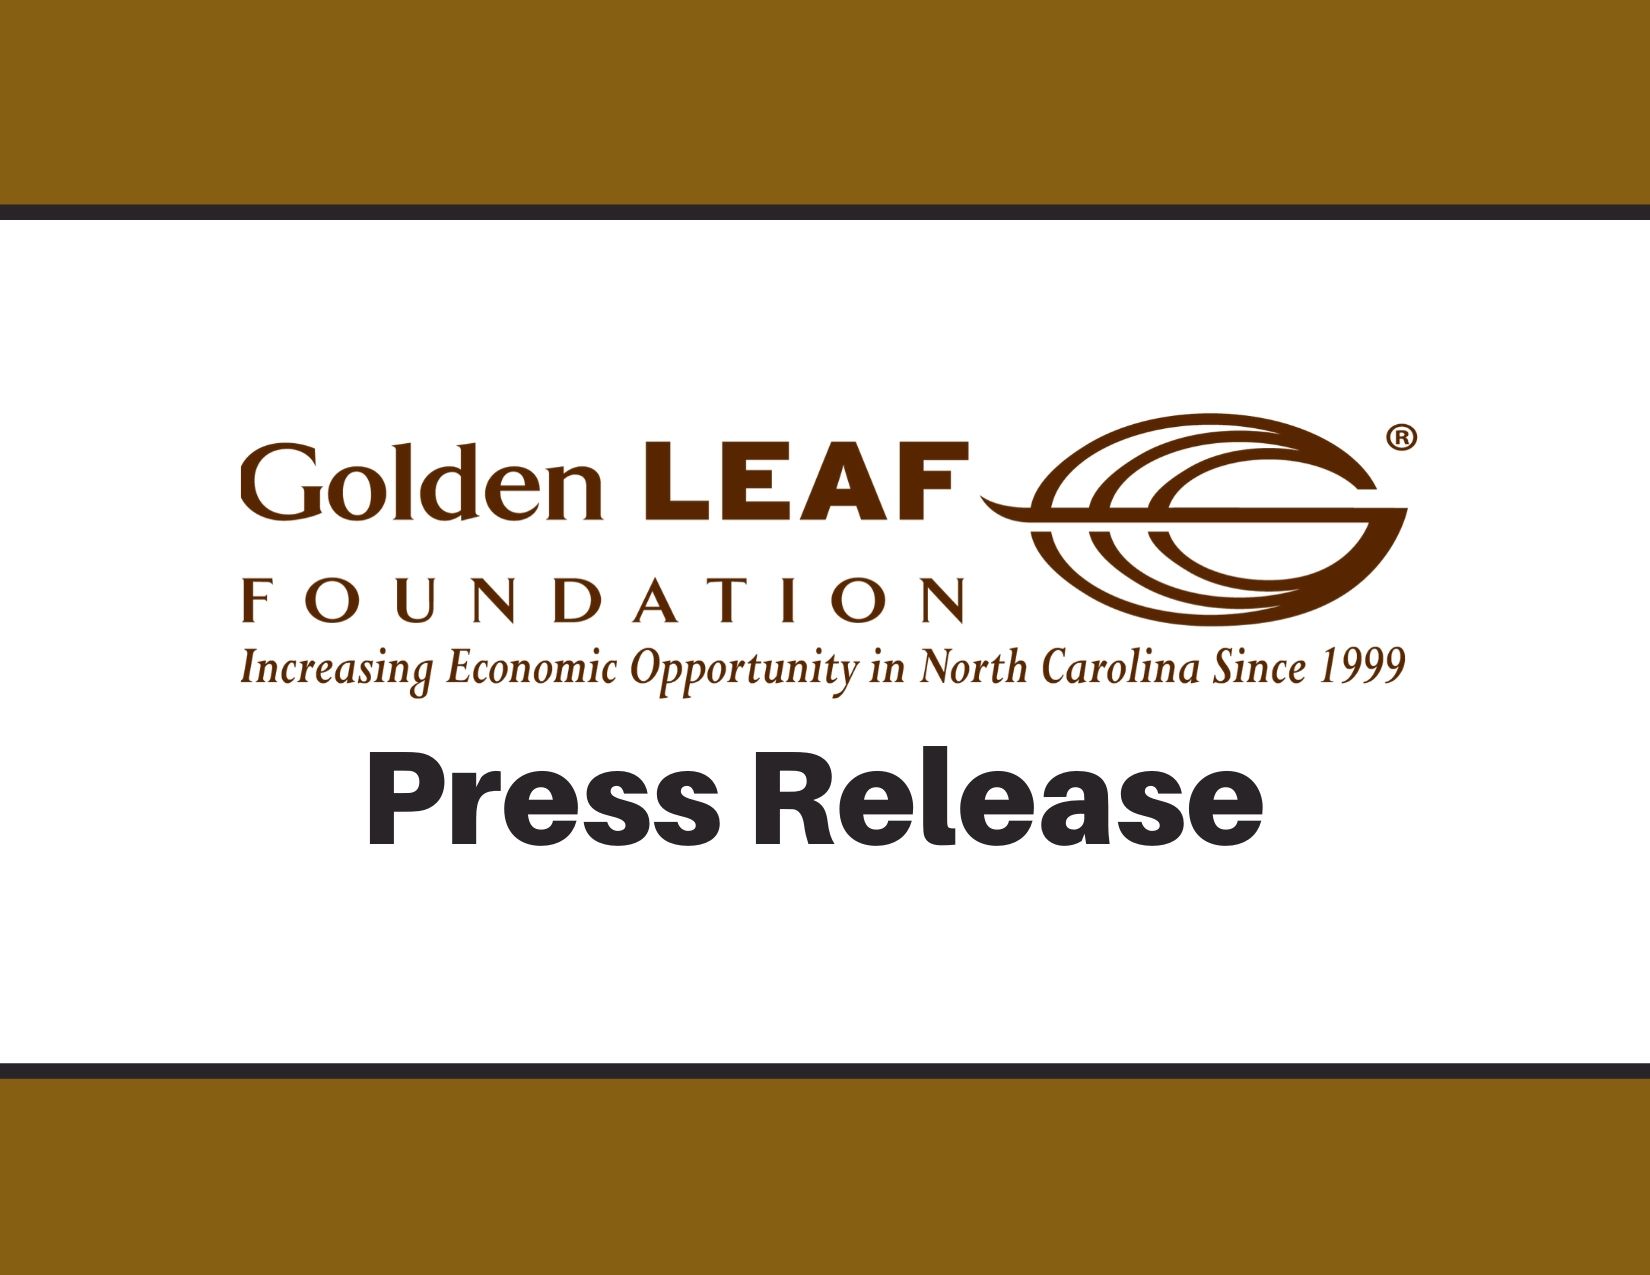 Golden LEAF announces $12.2 million in awards, welcomes new Board members at April Board meeting